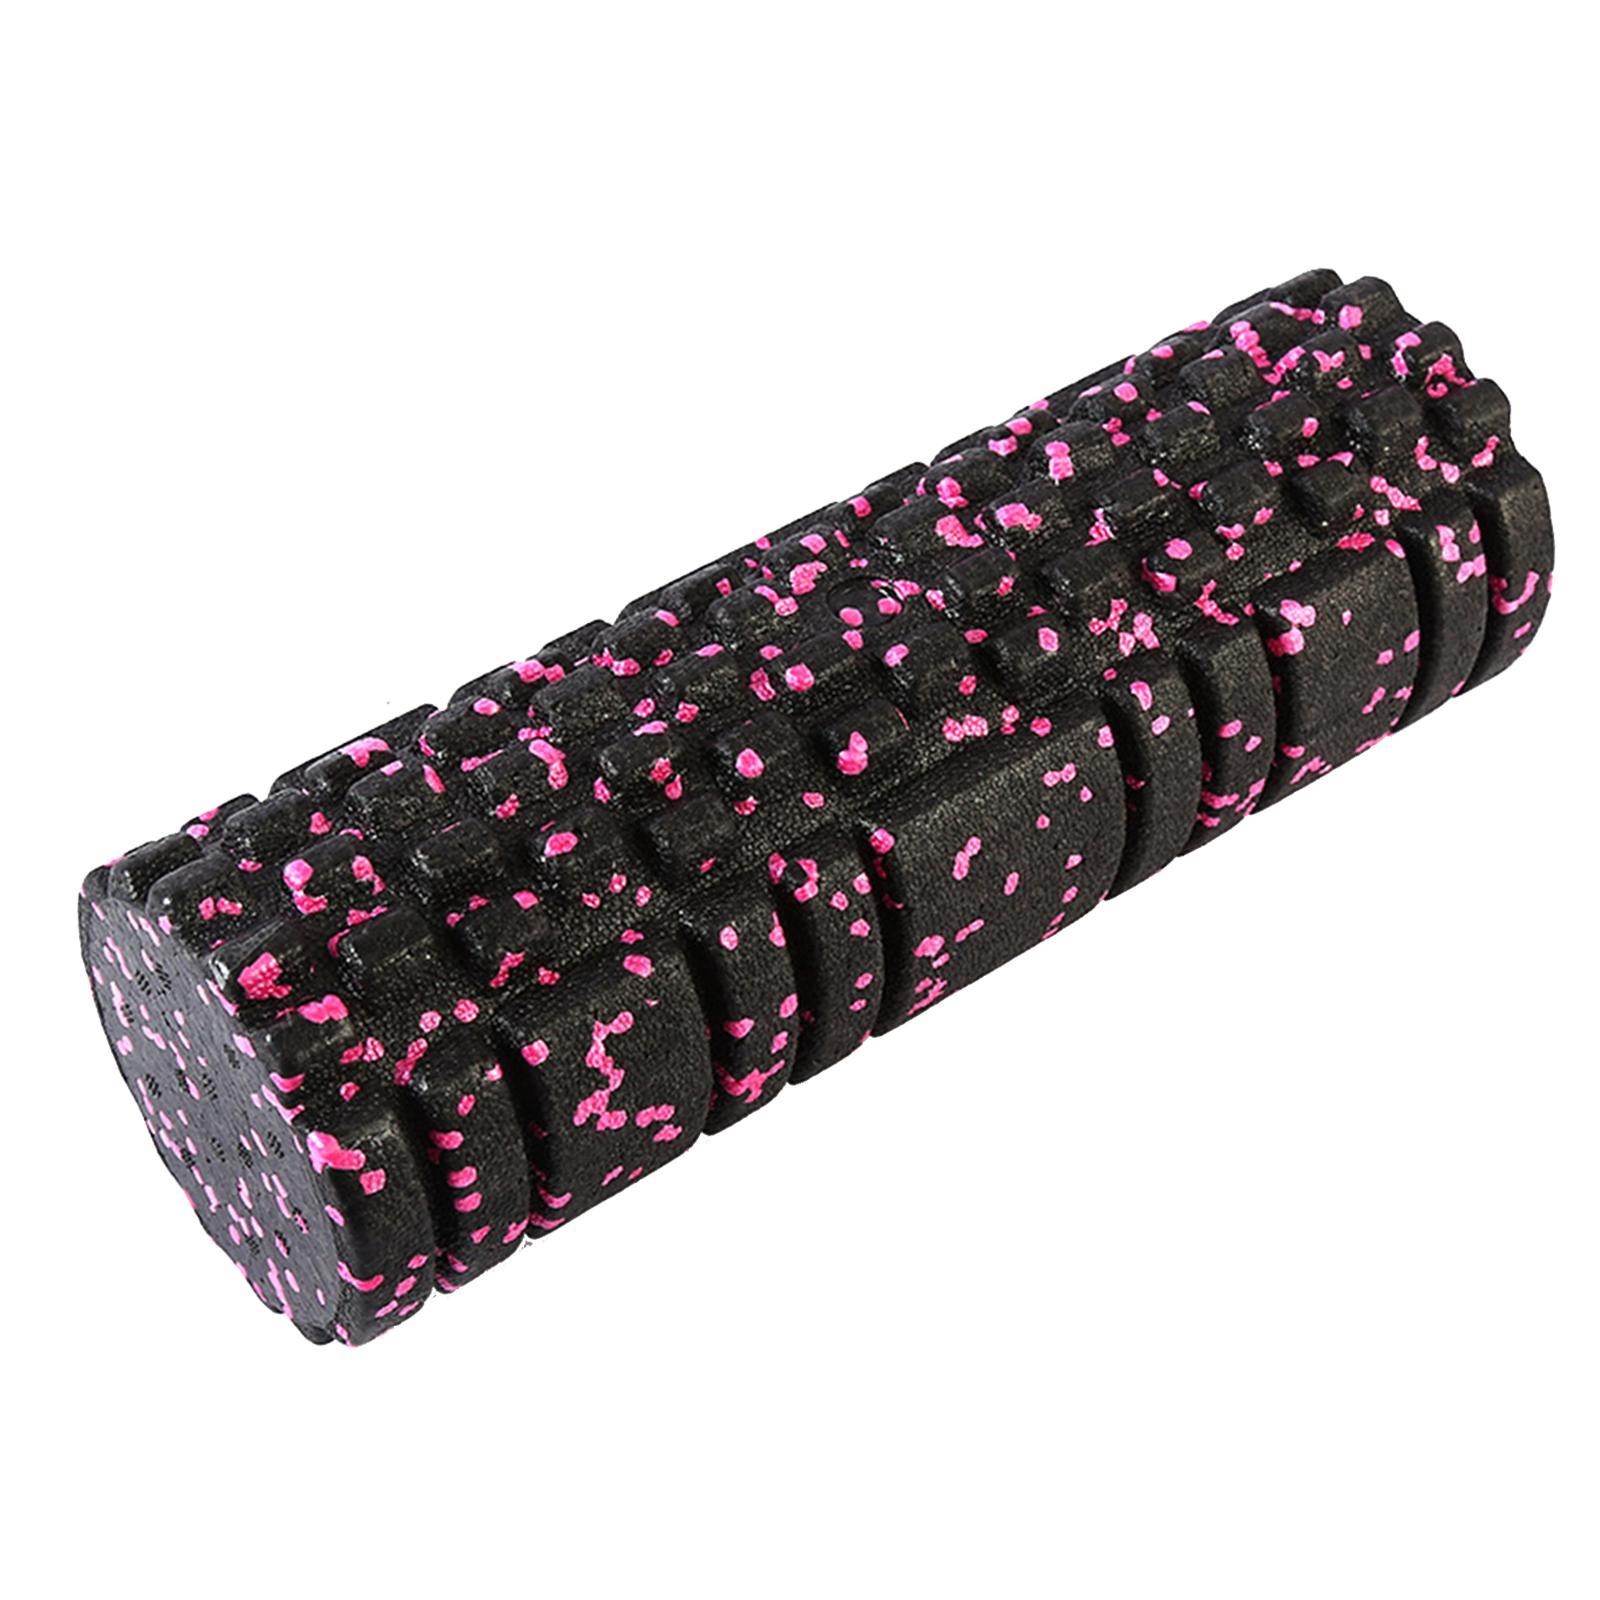 Foam Roller ,Speckled Foam Rollers, Extra Firm Premium, High Density Round Foam Roller Yoga Column for Workout Arm Pilates ,Stretching Fitness